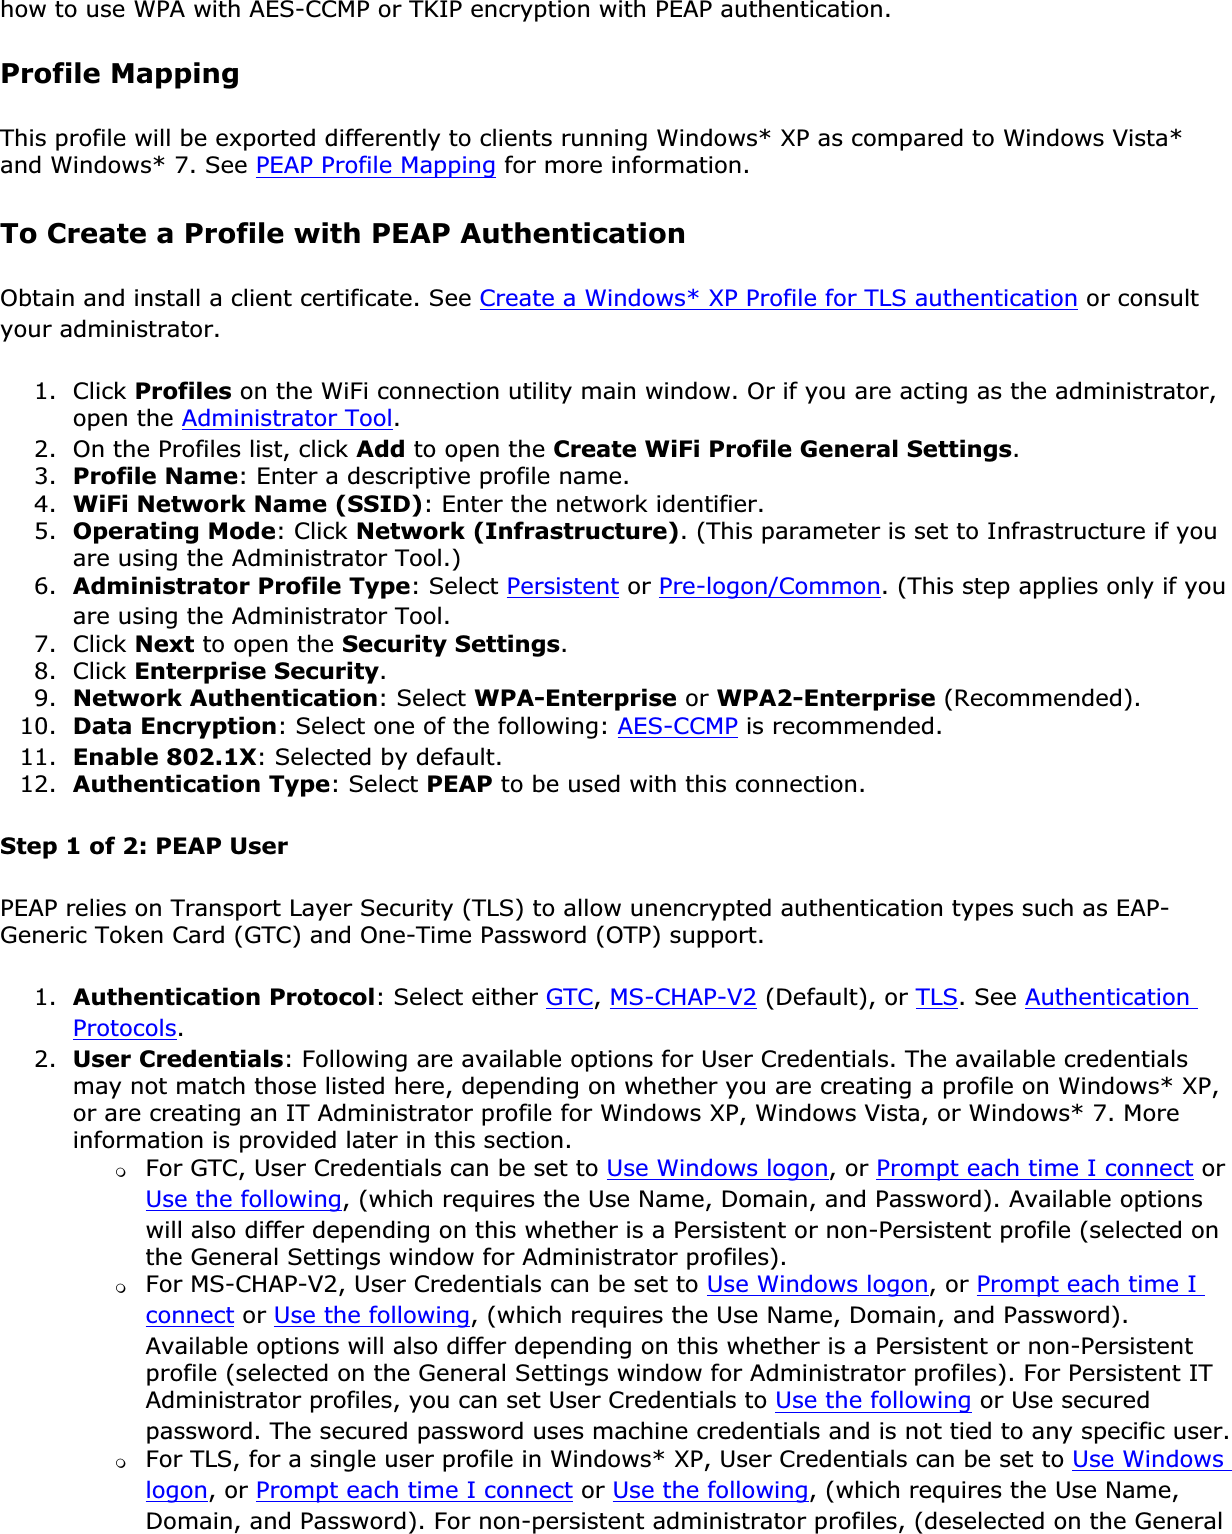 how to use WPA with AES-CCMP or TKIP encryption with PEAP authentication.Profile MappingThis profile will be exported differently to clients running Windows* XP as compared to Windows Vista* and Windows* 7. See PEAP Profile Mapping for more information. To Create a Profile with PEAP AuthenticationObtain and install a client certificate. See Create a Windows* XP Profile for TLS authentication or consult your administrator.1. Click Profiles on the WiFi connection utility main window. Or if you are acting as the administrator, open the Administrator Tool.2. On the Profiles list, click Add to open the Create WiFi Profile General Settings.3. Profile Name: Enter a descriptive profile name.4. WiFi Network Name (SSID): Enter the network identifier.5. Operating Mode: Click Network (Infrastructure). (This parameter is set to Infrastructure if you are using the Administrator Tool.)6. Administrator Profile Type: Select Persistent or Pre-logon/Common. (This step applies only if you are using the Administrator Tool.7. Click Next to open the Security Settings.8. Click Enterprise Security.9. Network Authentication: Select WPA-Enterprise or WPA2-Enterprise (Recommended).10. Data Encryption: Select one of the following: AES-CCMP is recommended.11. Enable 802.1X: Selected by default.12. Authentication Type: Select PEAP to be used with this connection.Step 1 of 2: PEAP UserPEAP relies on Transport Layer Security (TLS) to allow unencrypted authentication types such as EAP-Generic Token Card (GTC) and One-Time Password (OTP) support.1. Authentication Protocol: Select either GTC,MS-CHAP-V2 (Default), or TLS. See AuthenticationProtocols.2. User Credentials: Following are available options for User Credentials. The available credentials may not match those listed here, depending on whether you are creating a profile on Windows* XP, or are creating an IT Administrator profile for Windows XP, Windows Vista, or Windows* 7. More information is provided later in this section. ❍For GTC, User Credentials can be set to Use Windows logon, or Prompt each time I connect or Use the following, (which requires the Use Name, Domain, and Password). Available options will also differ depending on this whether is a Persistent or non-Persistent profile (selected on the General Settings window for Administrator profiles). ❍For MS-CHAP-V2, User Credentials can be set to Use Windows logon, or Prompt each time I connect or Use the following, (which requires the Use Name, Domain, and Password). Available options will also differ depending on this whether is a Persistent or non-Persistent profile (selected on the General Settings window for Administrator profiles). For Persistent IT Administrator profiles, you can set User Credentials to Use the following or Use secured password. The secured password uses machine credentials and is not tied to any specific user.❍For TLS, for a single user profile in Windows* XP, User Credentials can be set to Use Windows logon, or Prompt each time I connect or Use the following, (which requires the Use Name, Domain, and Password). For non-persistent administrator profiles, (deselected on the General 